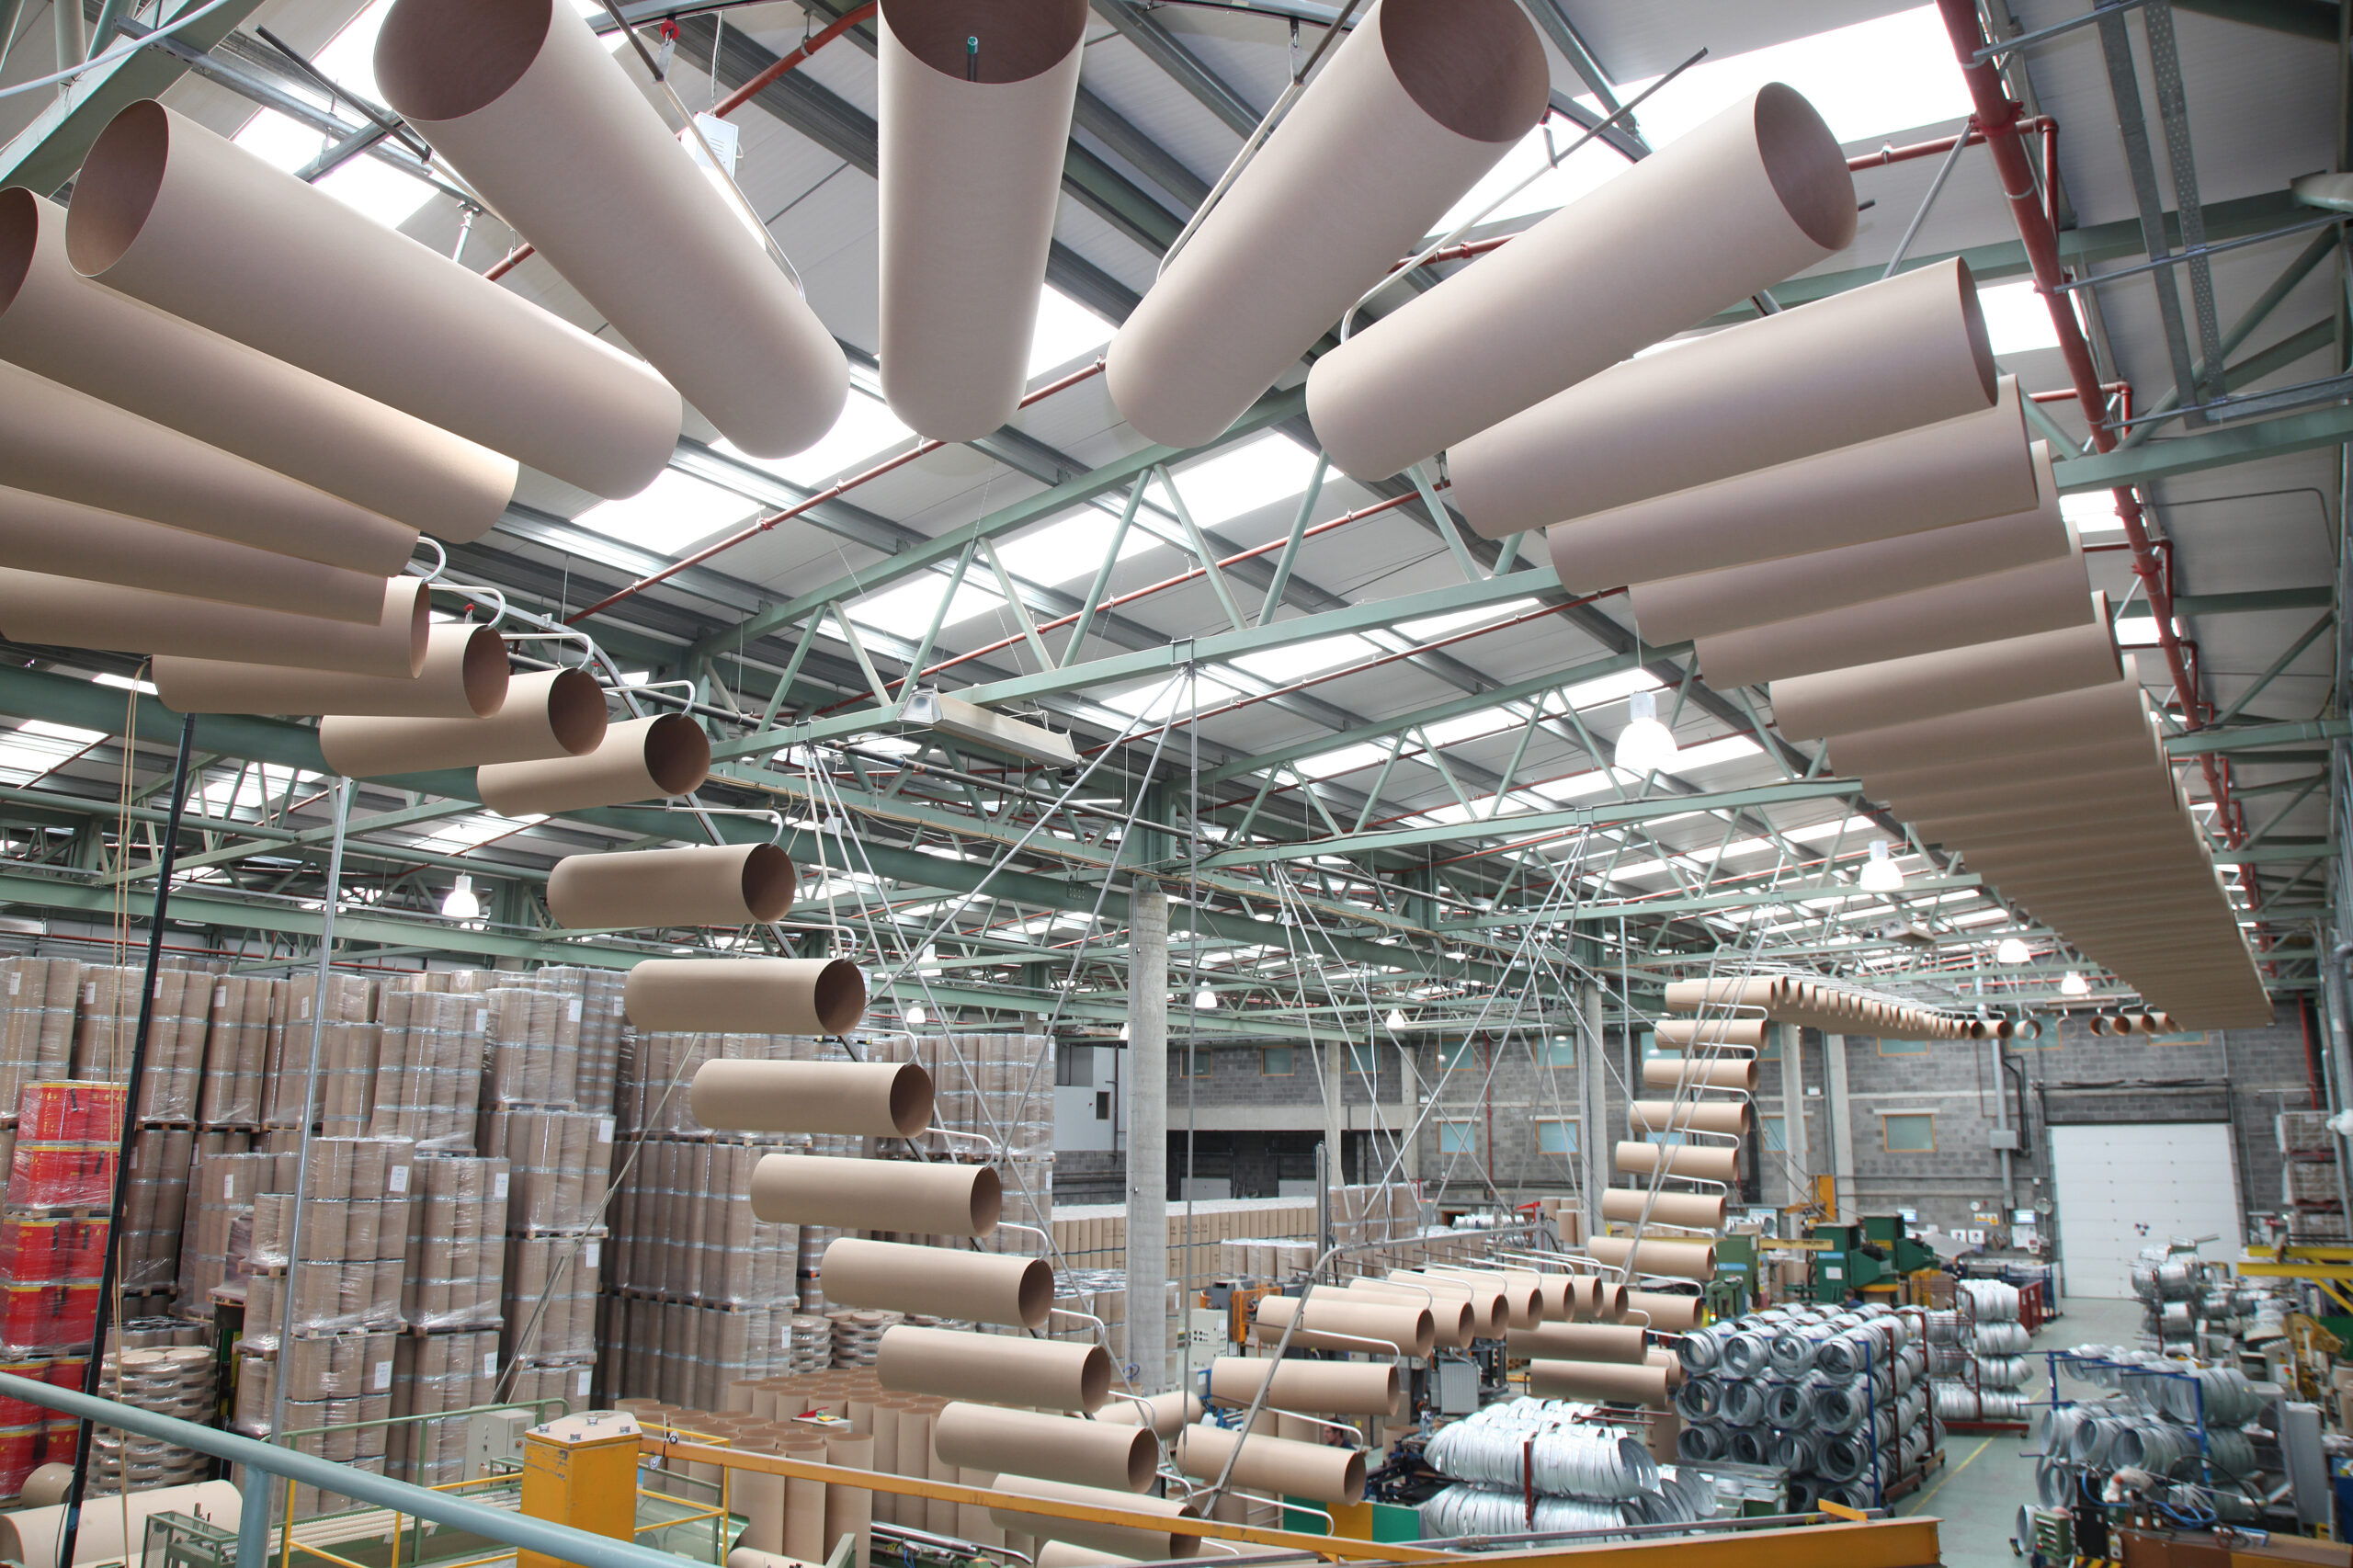 Birdseye view of Industrial Packaging production plant